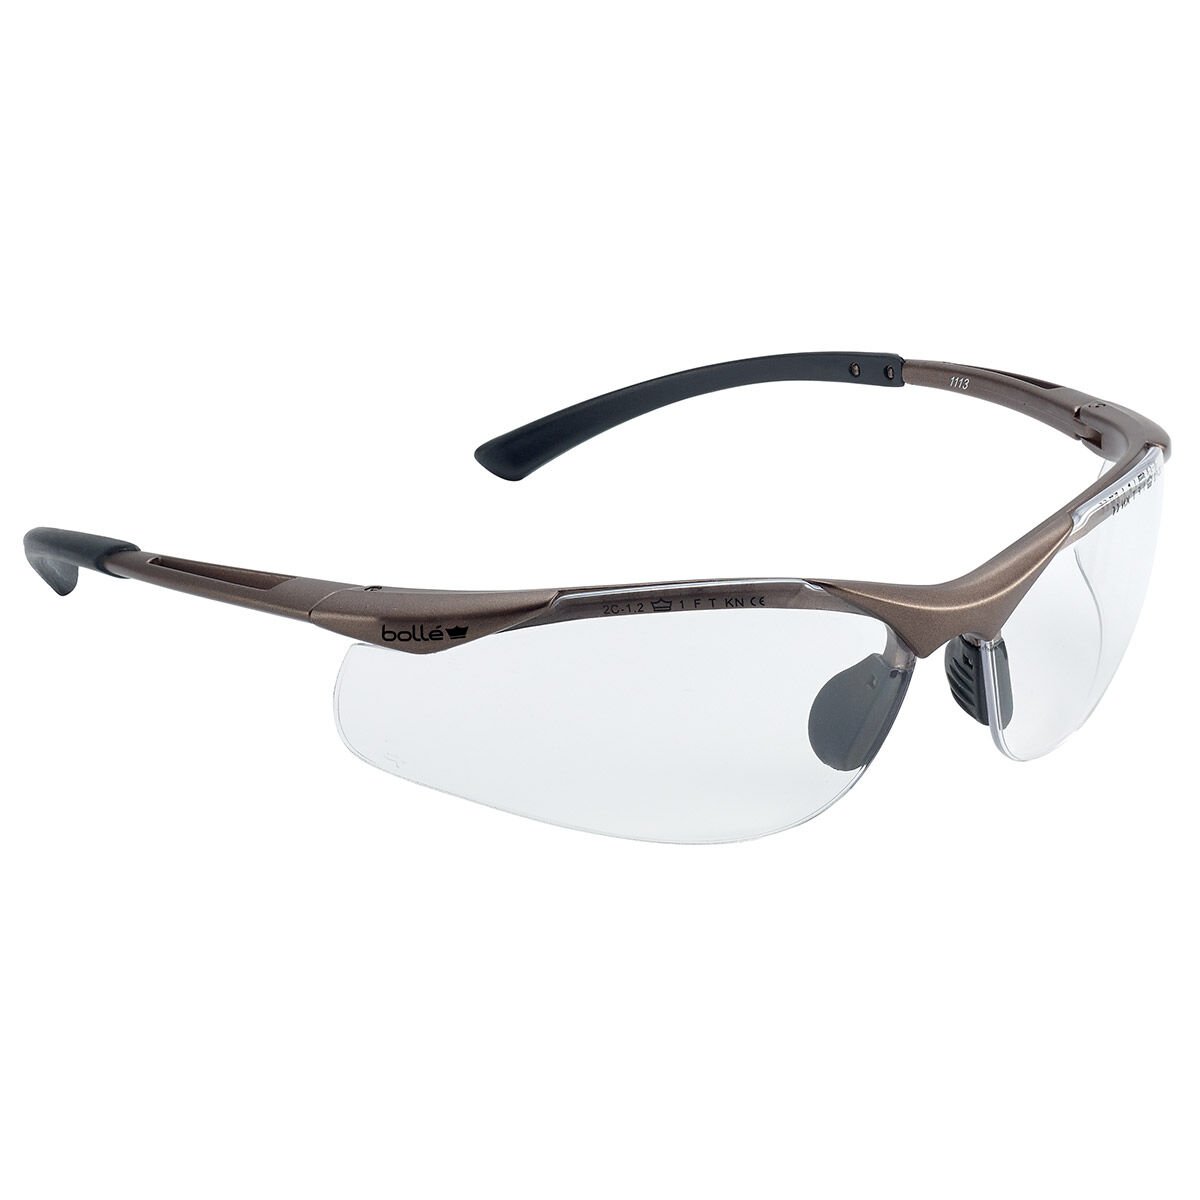 Bolle Contour Range Sports Cycling Safety Glasses Spectacles Eye Protection 